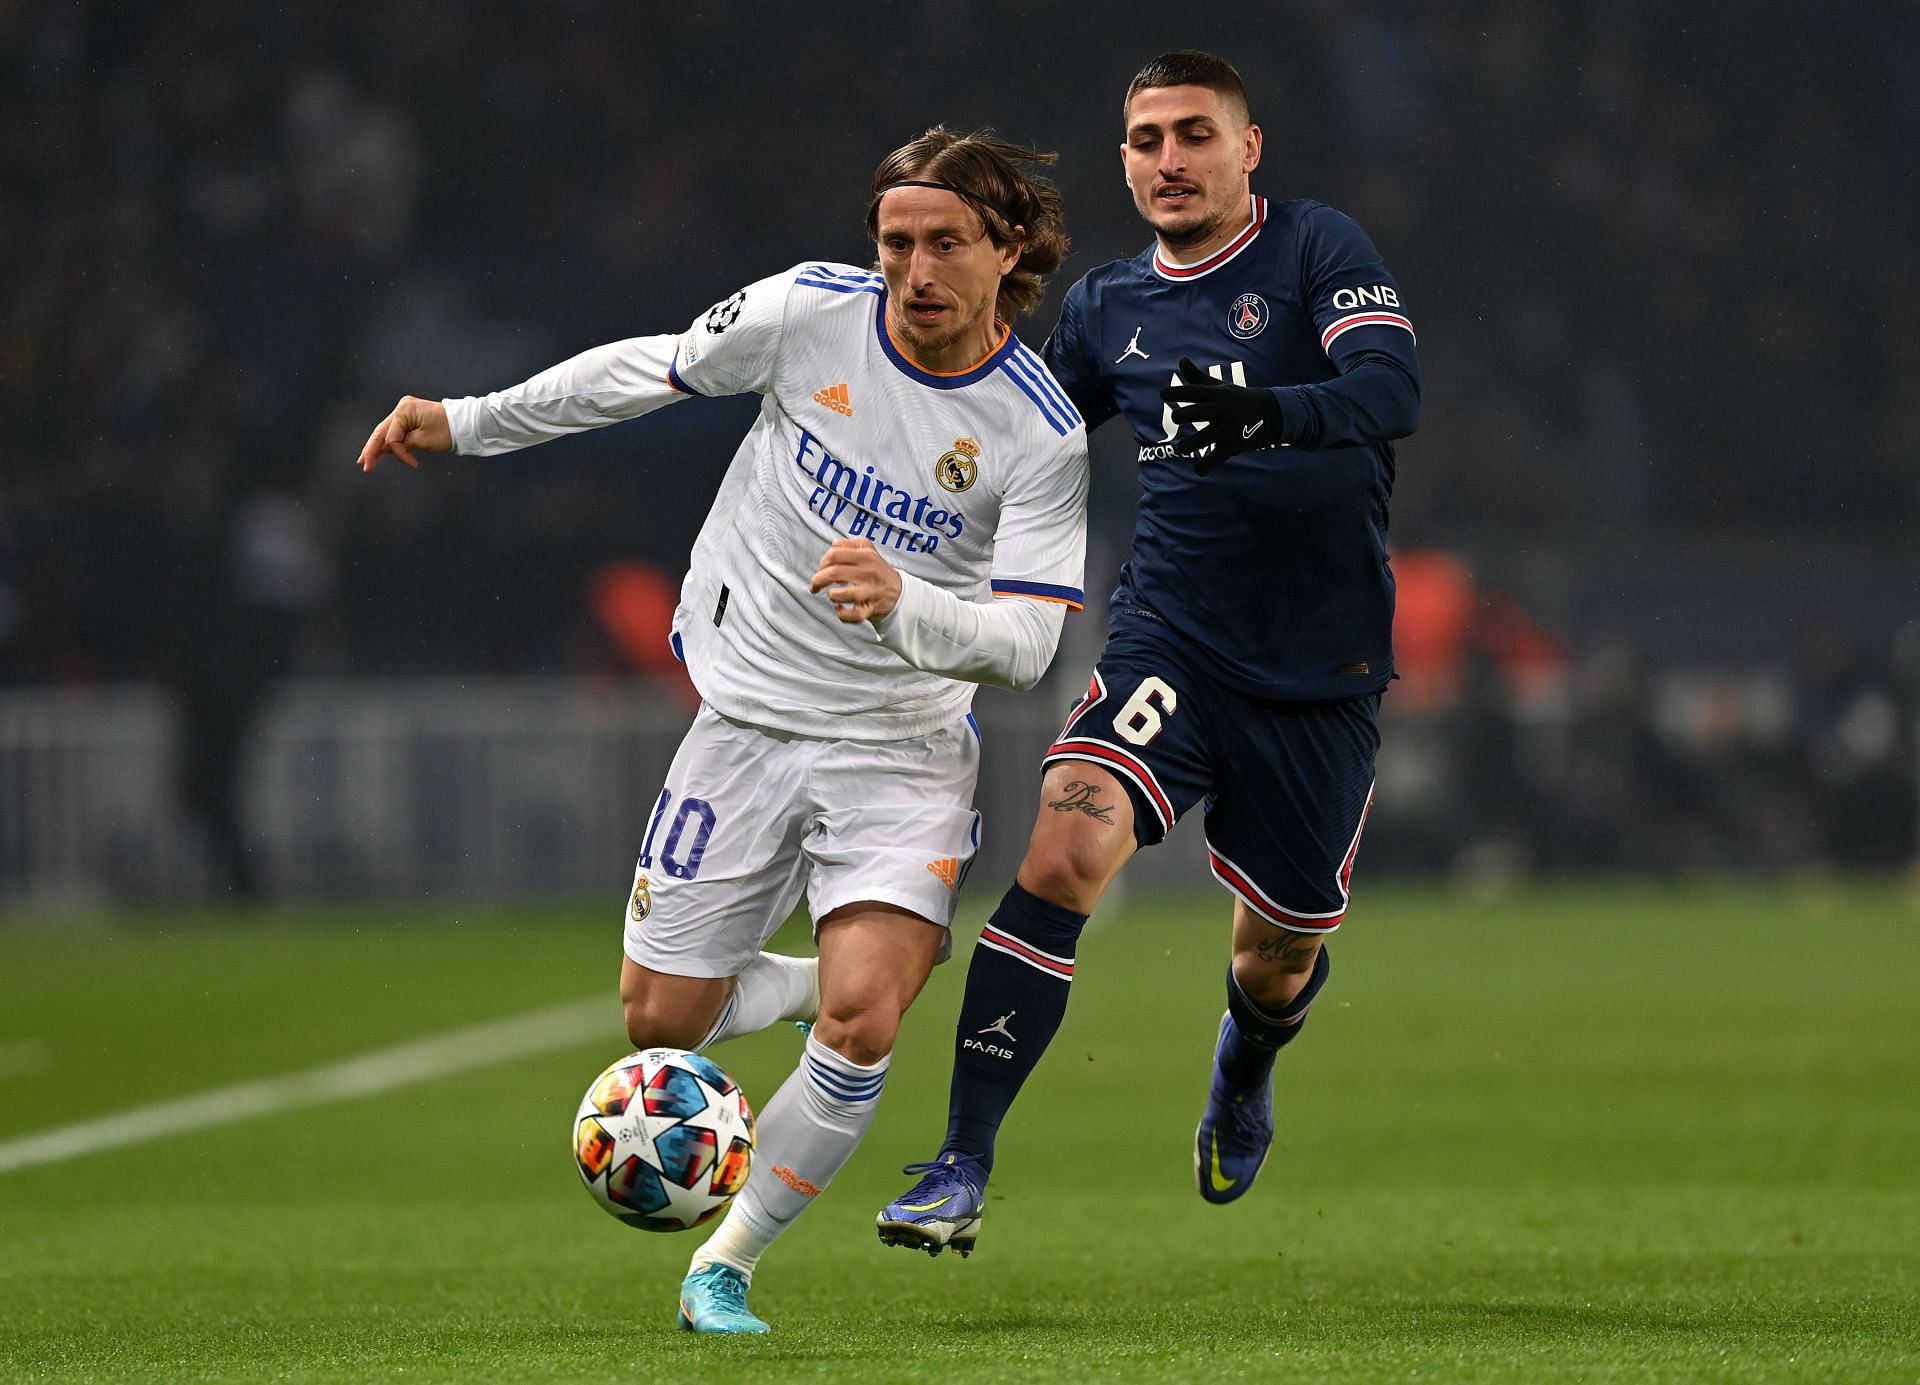 Luka Modric and Marco Verratti are the midfield anchors for Real Madrid and PSG respectively